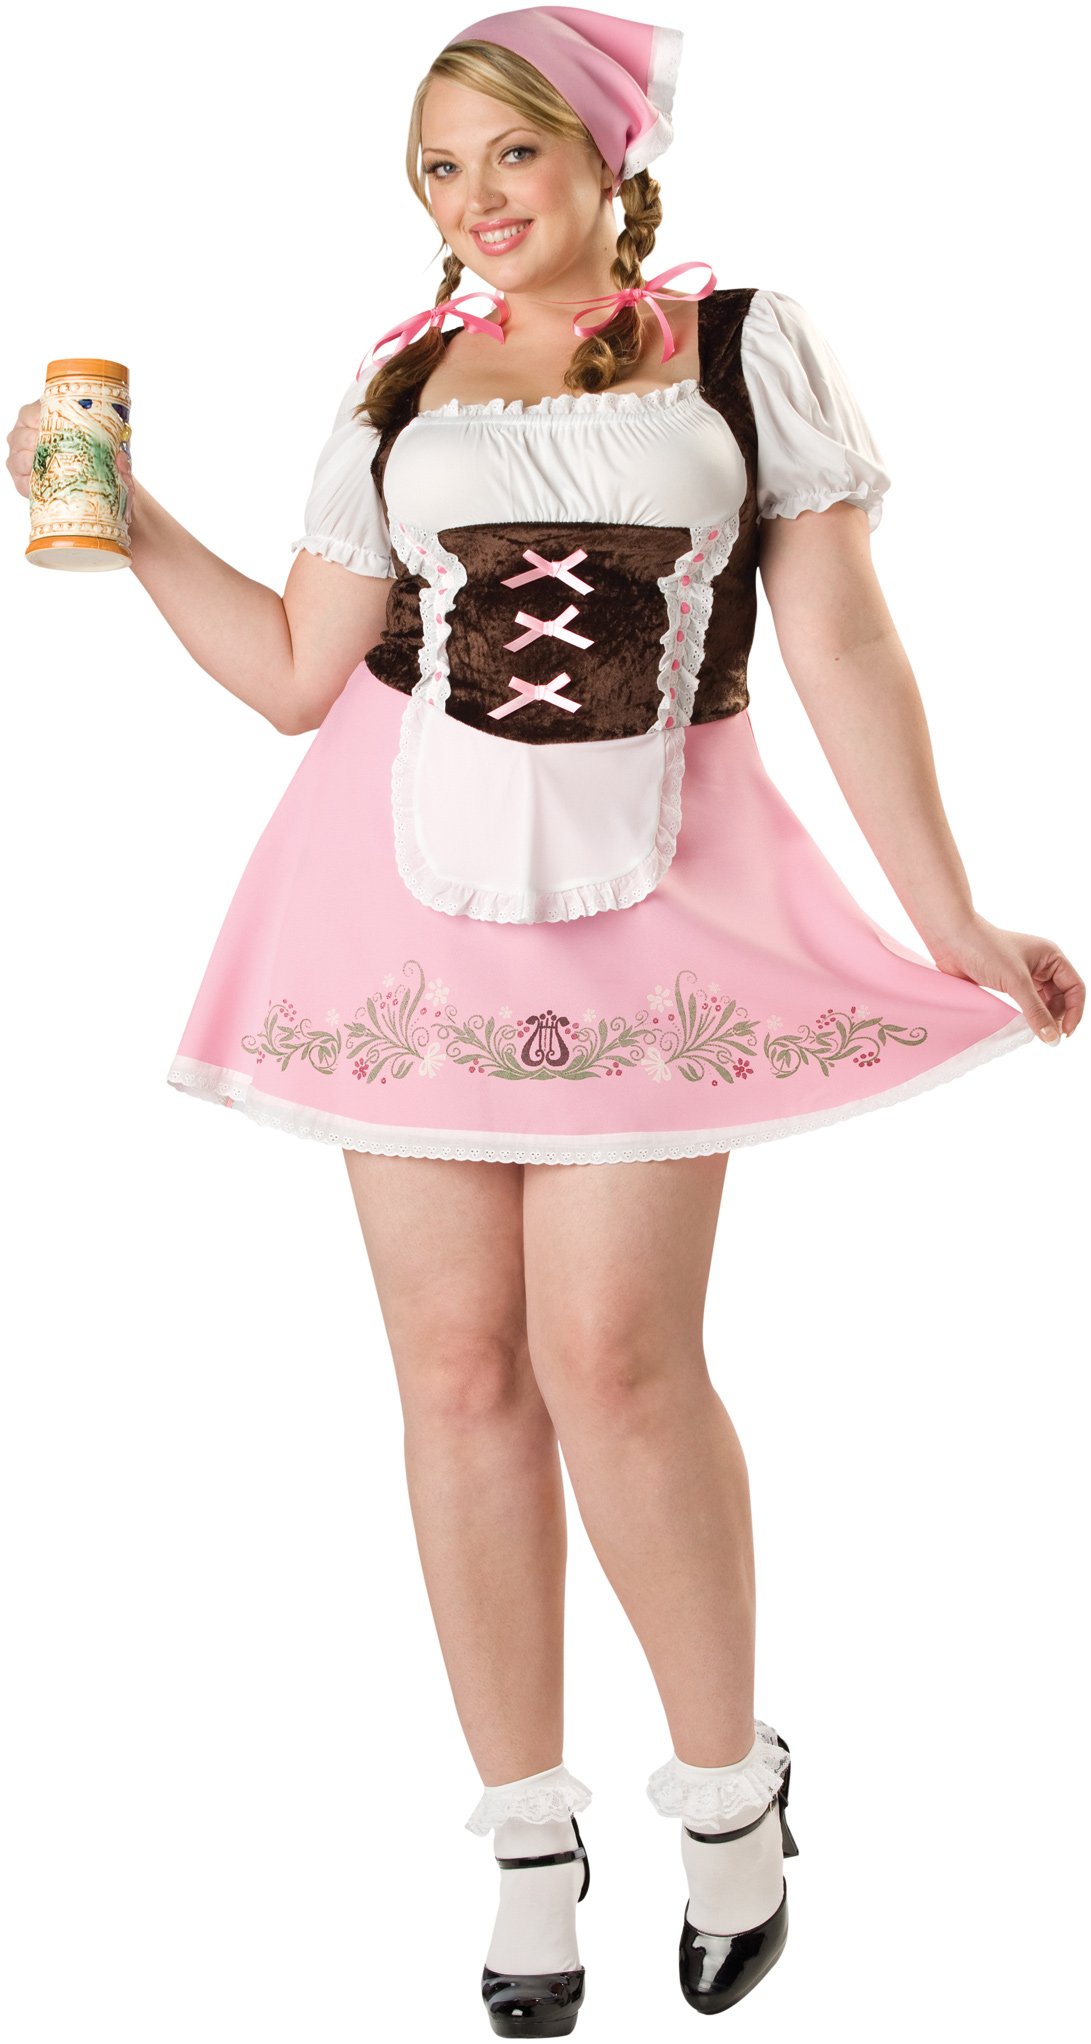 Fetching Fraulein Adult Plus Costume